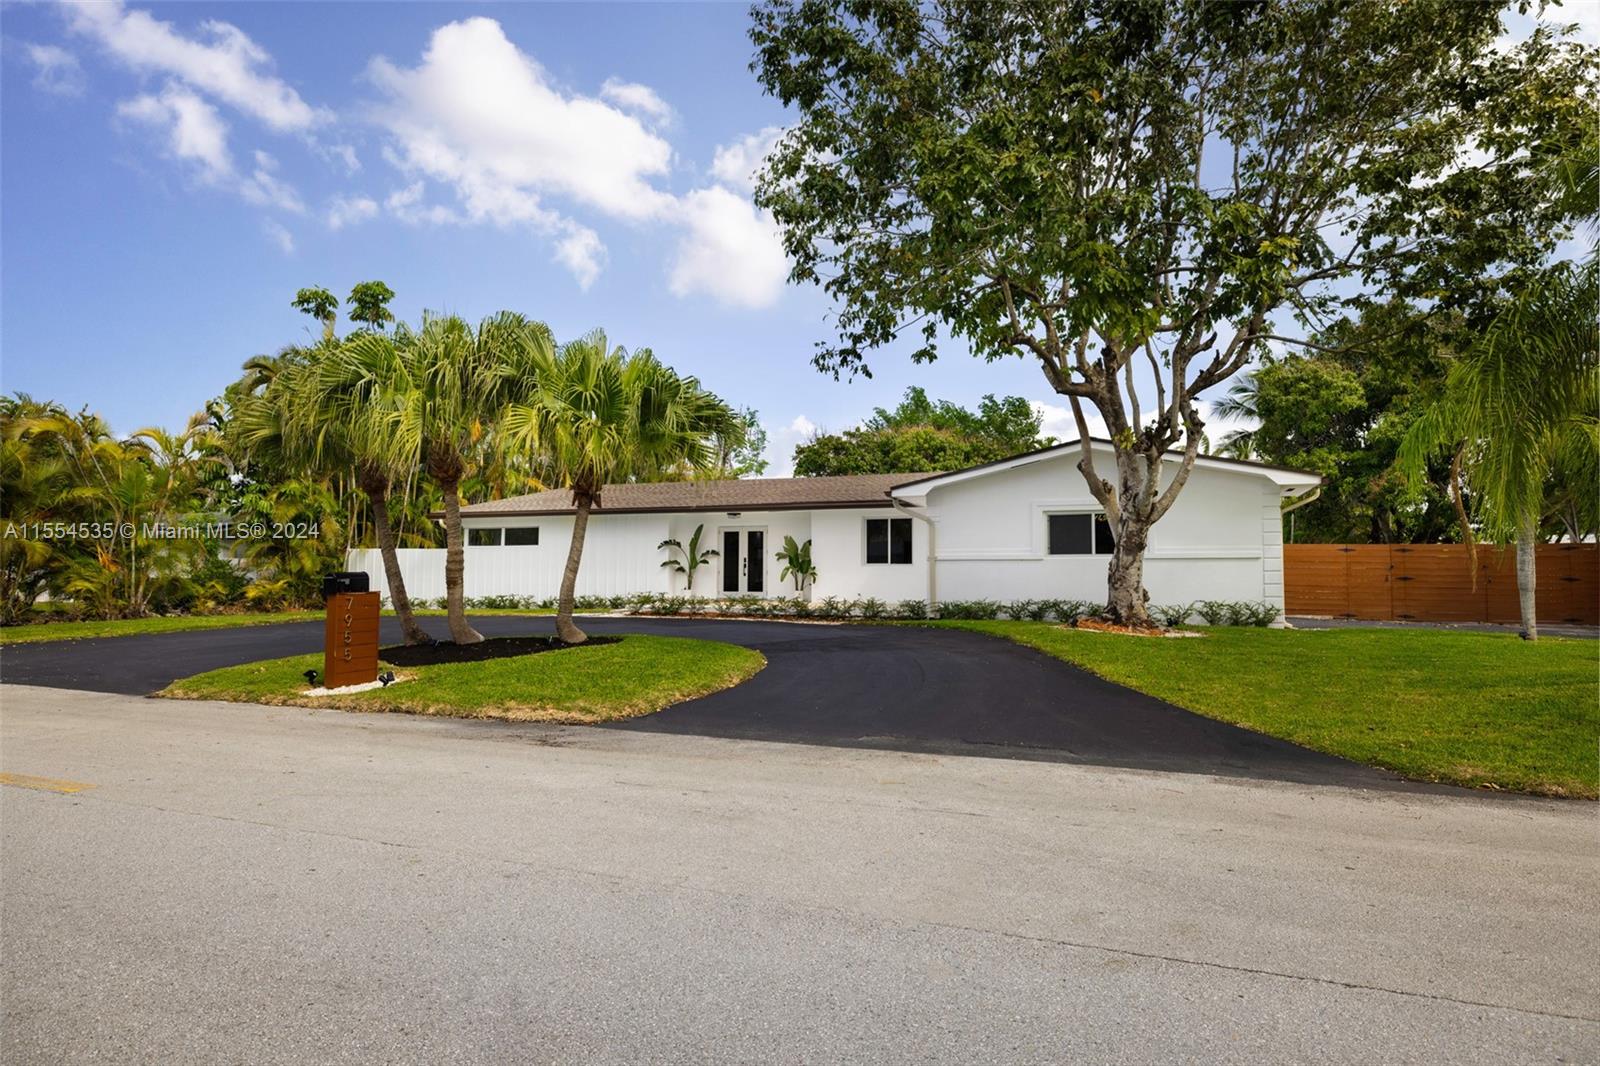 7955 Sw 162nd St St, Palmetto Bay, Miami-Dade County, Florida - 4 Bedrooms  
3 Bathrooms - 